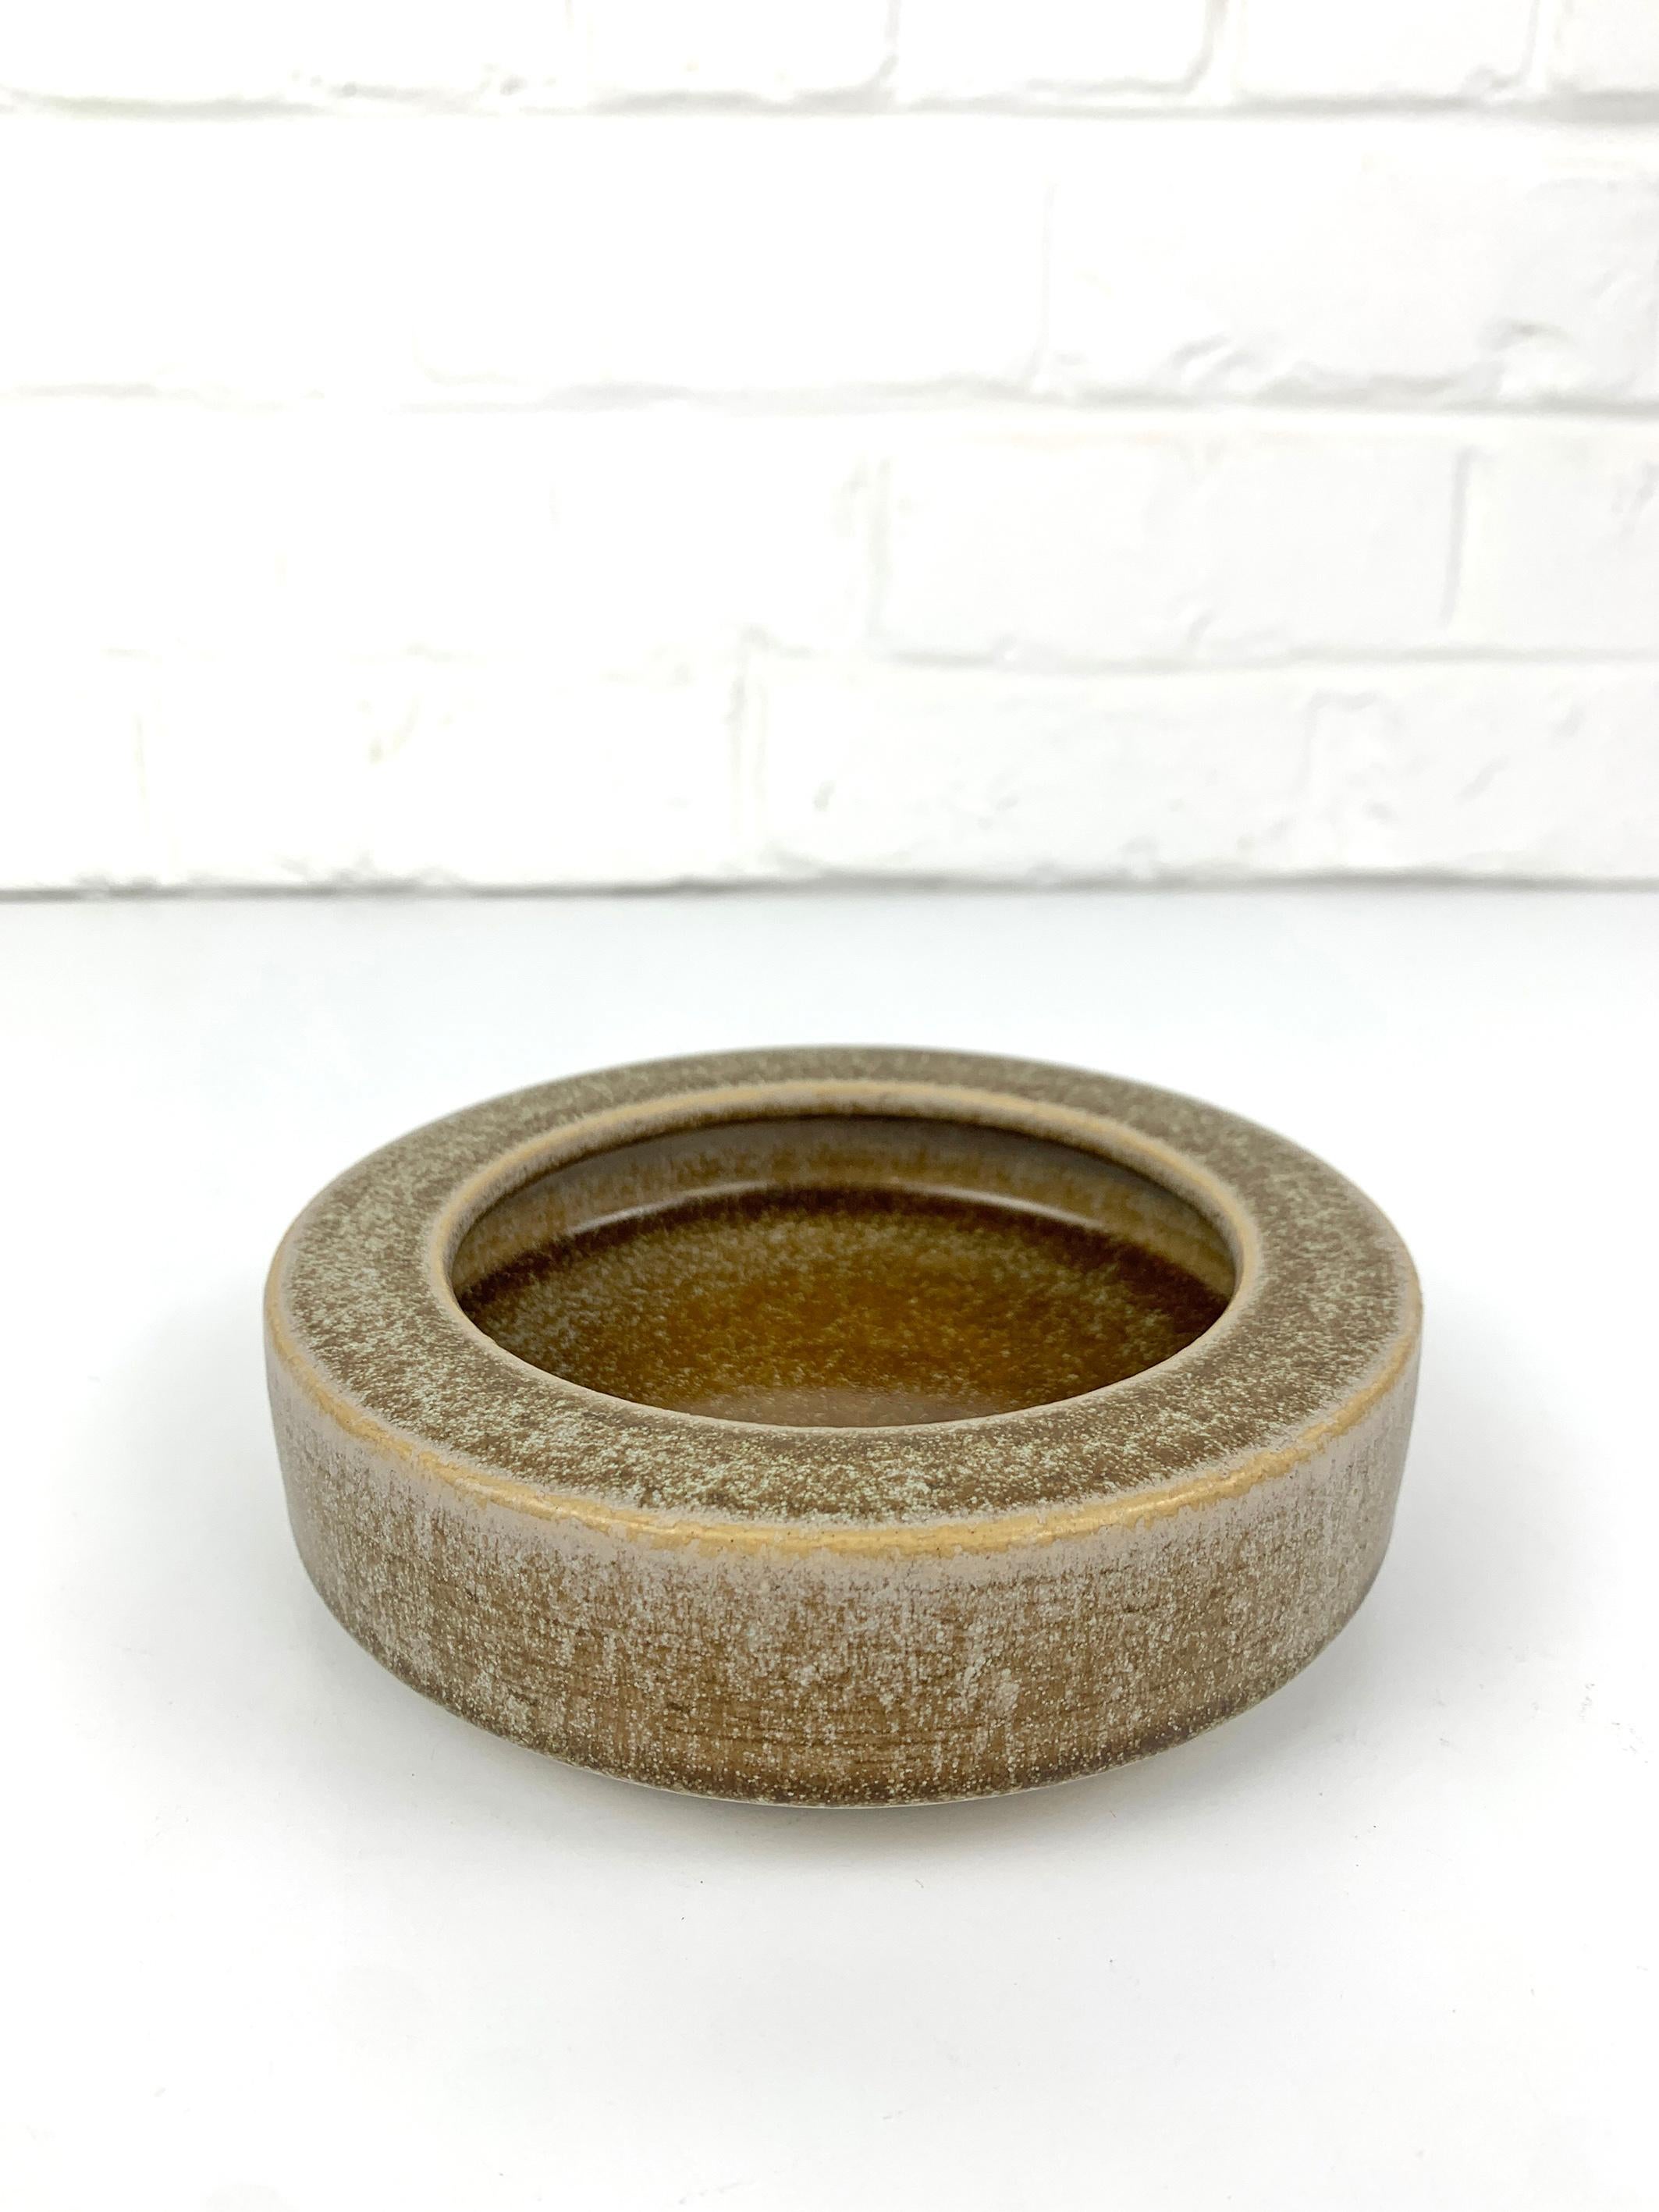 Round ceramic vide-poche or low bowl in beige-brown earth tones. 

Scandinavian Mid-Century 1960s, produced by Palshus (Denmark), founded by Per and his wife Annelise Linnemann-Schmidt. 

The couple created and produced chamotte (danish clay)